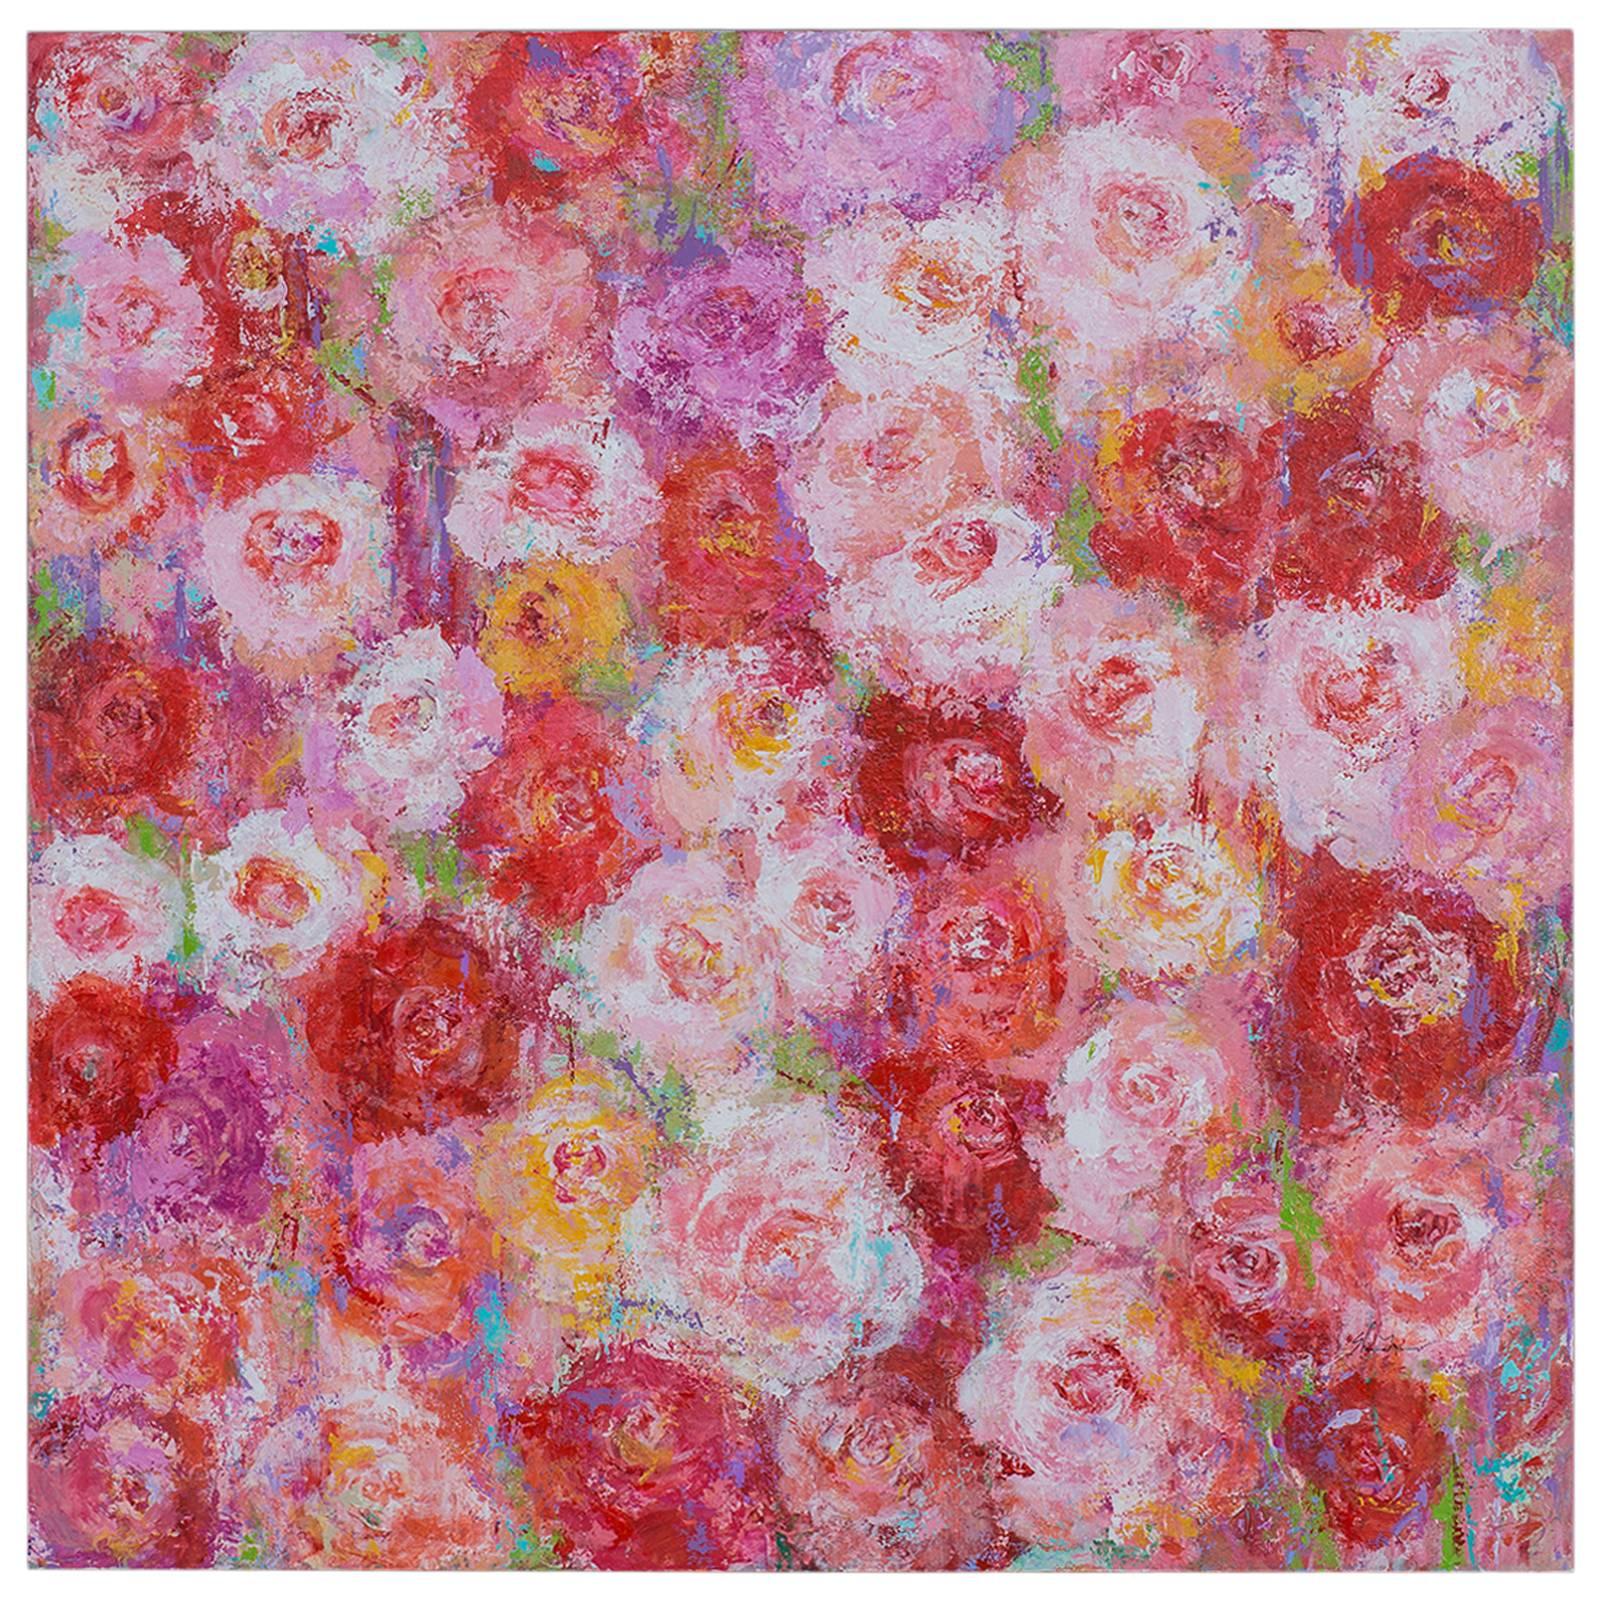 "Roses for Alexa", Original Acrylic, Signed by Artist Sheema Muneer Lower Right